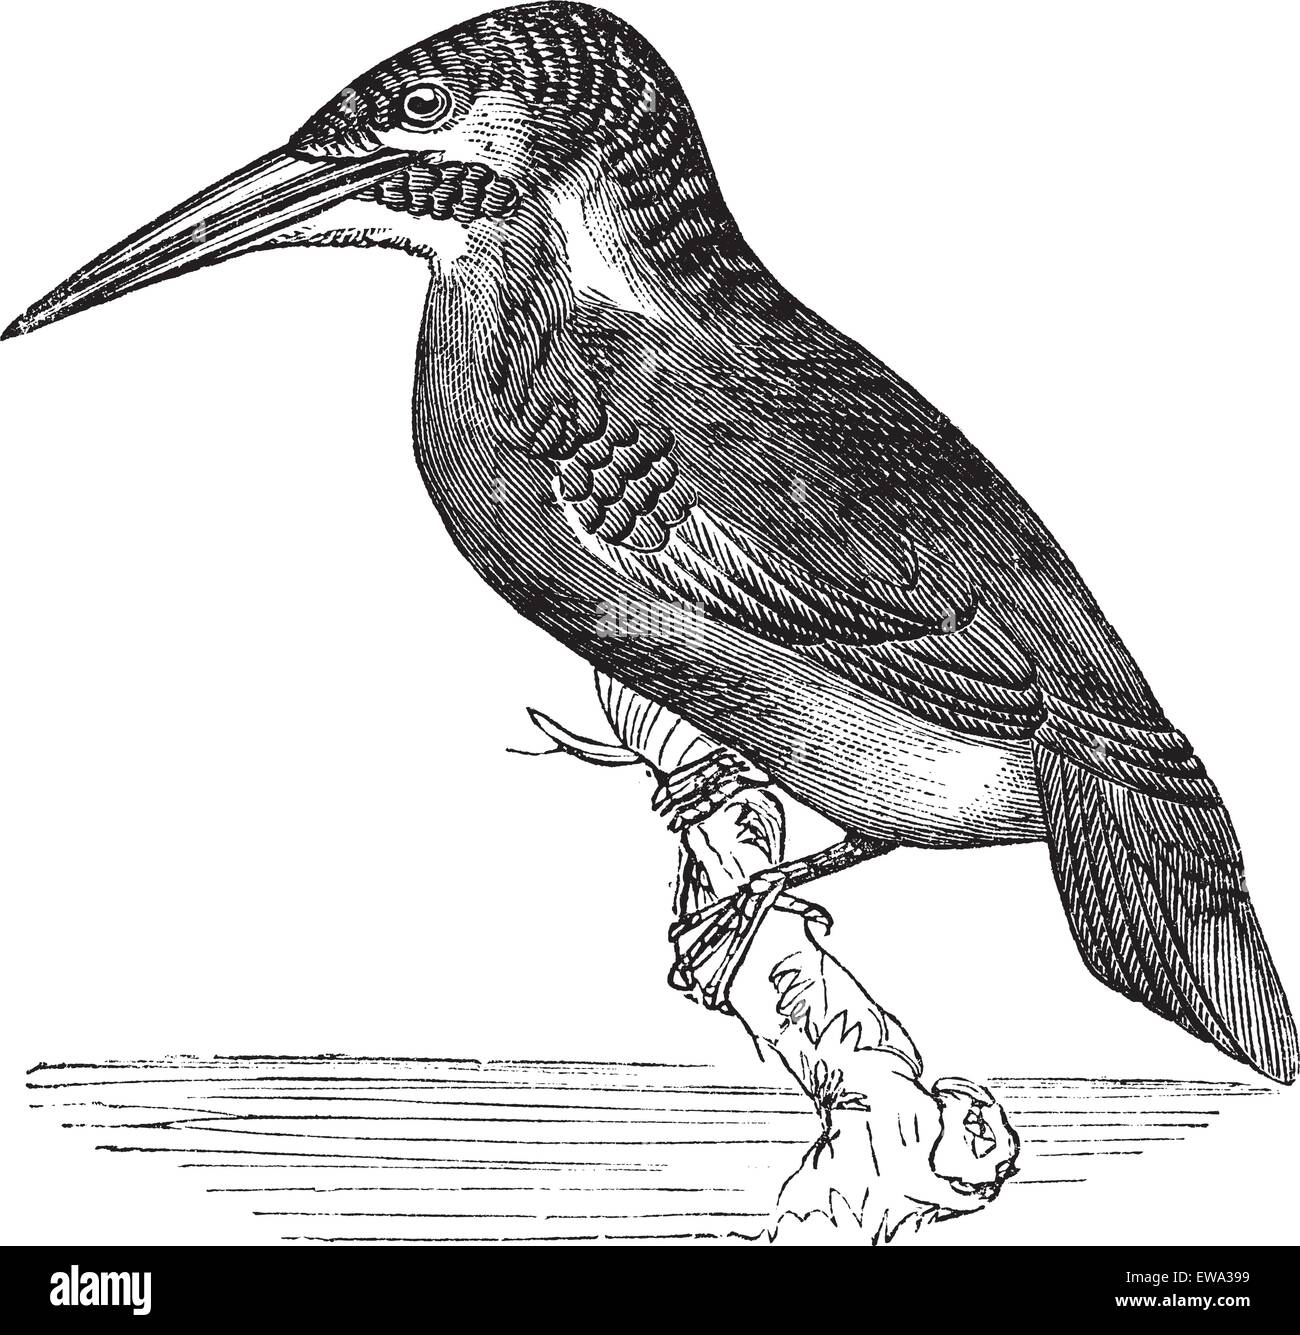 Common Kingfisher or Alcedo ispida, vintage engraving. Old engraved illustration of Common Kingfisher waiting on a branch. Stock Vector